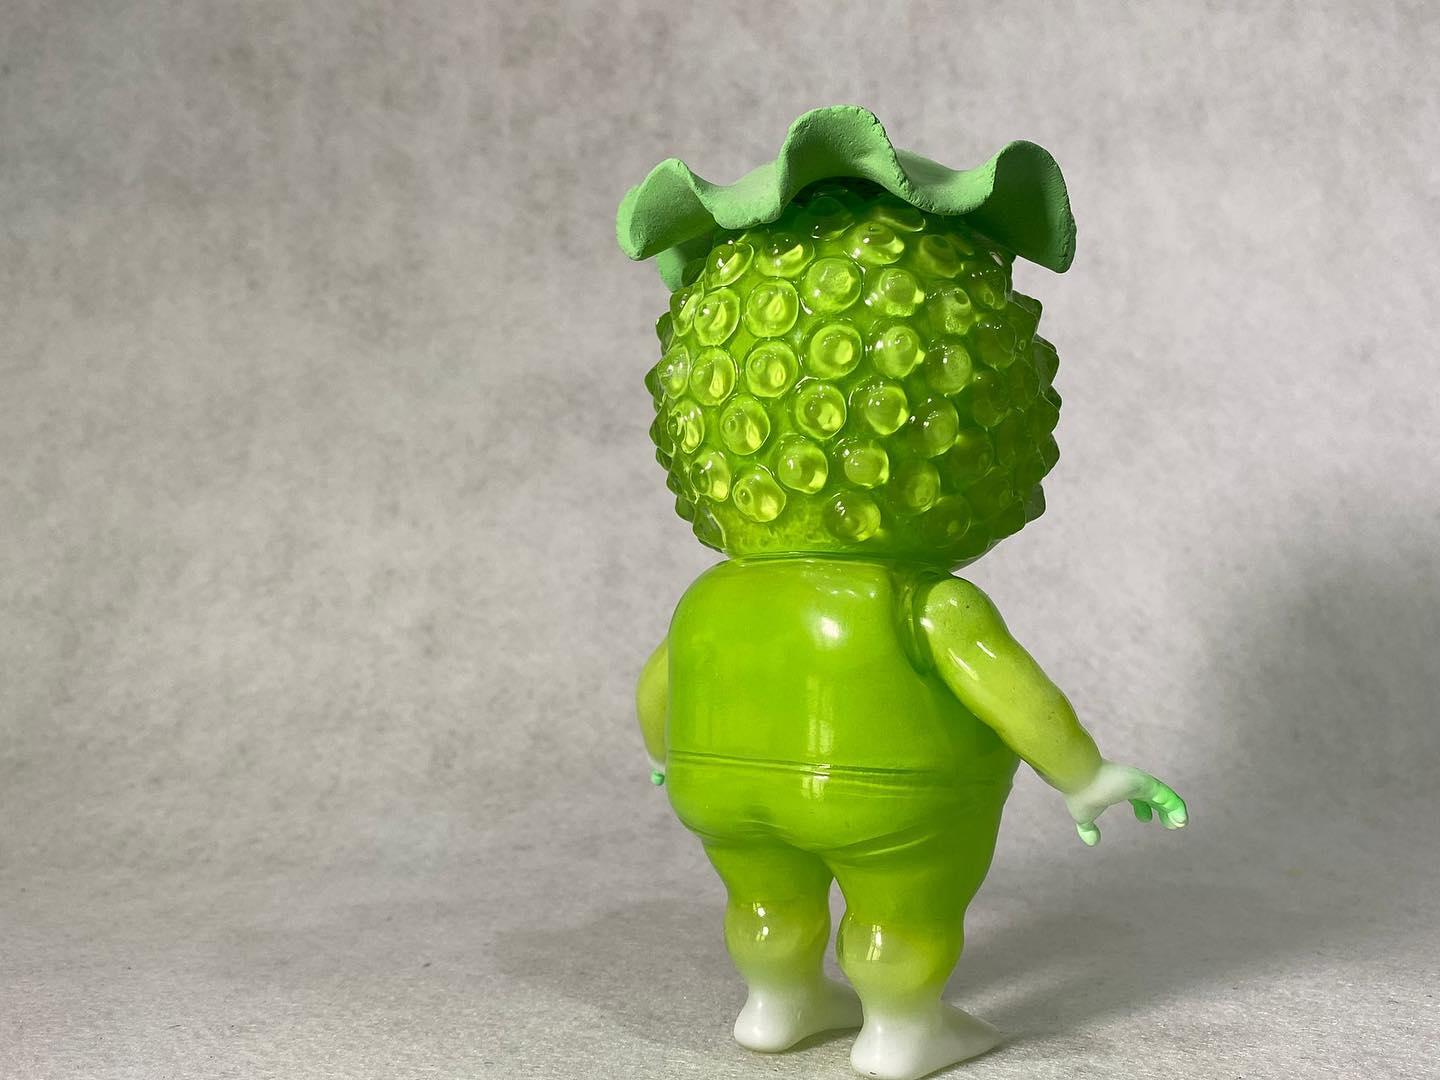 A small green toy

Description automatically generated with low confidence